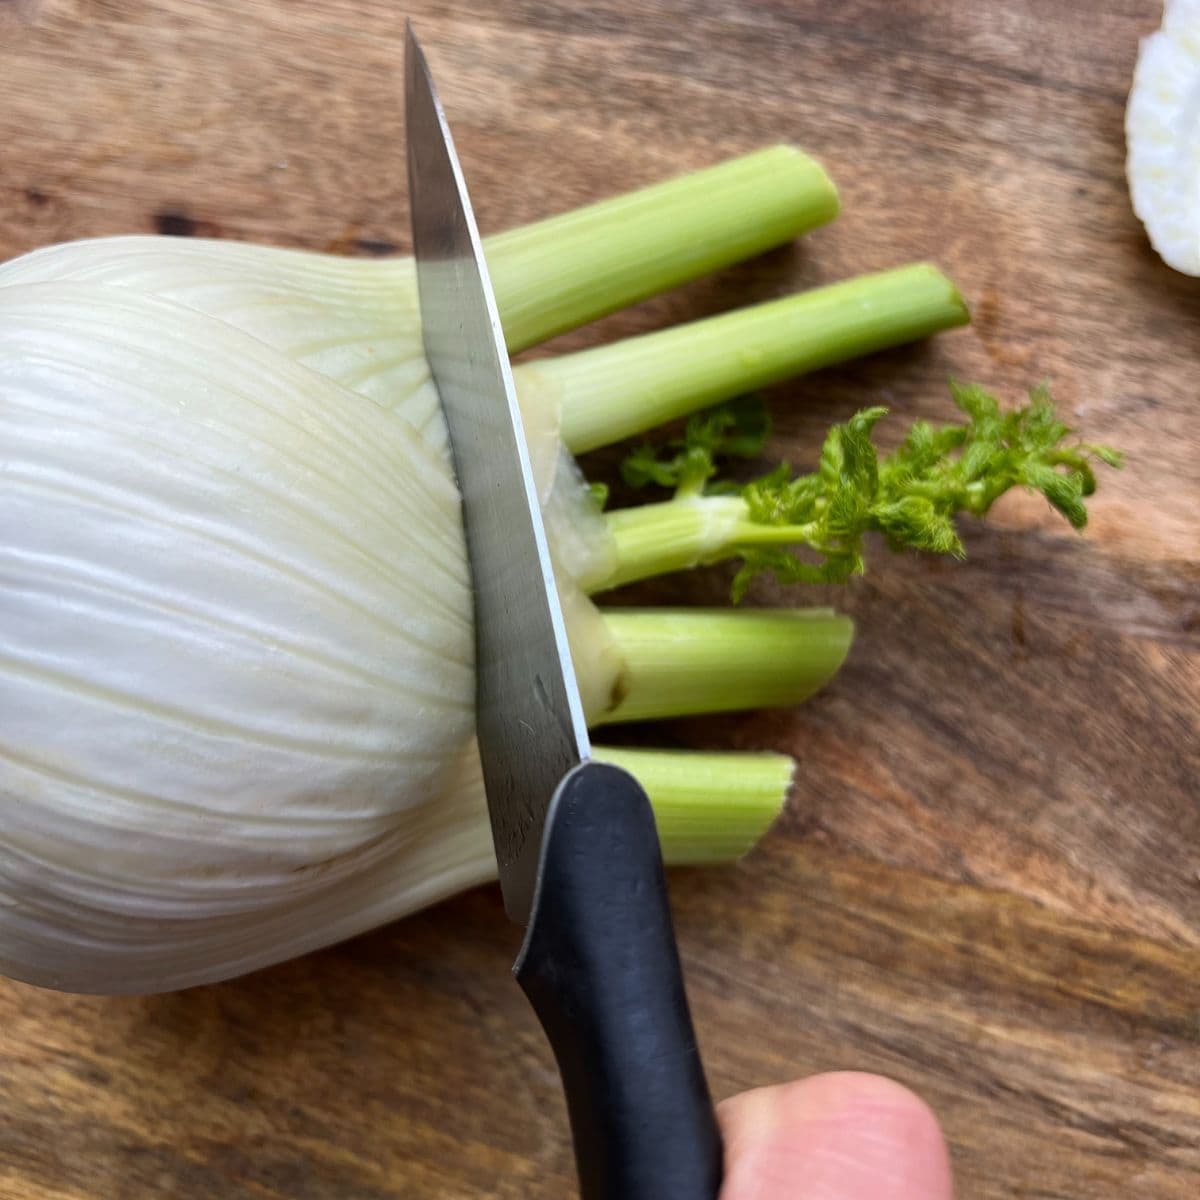 Cutting the top of the fennel.